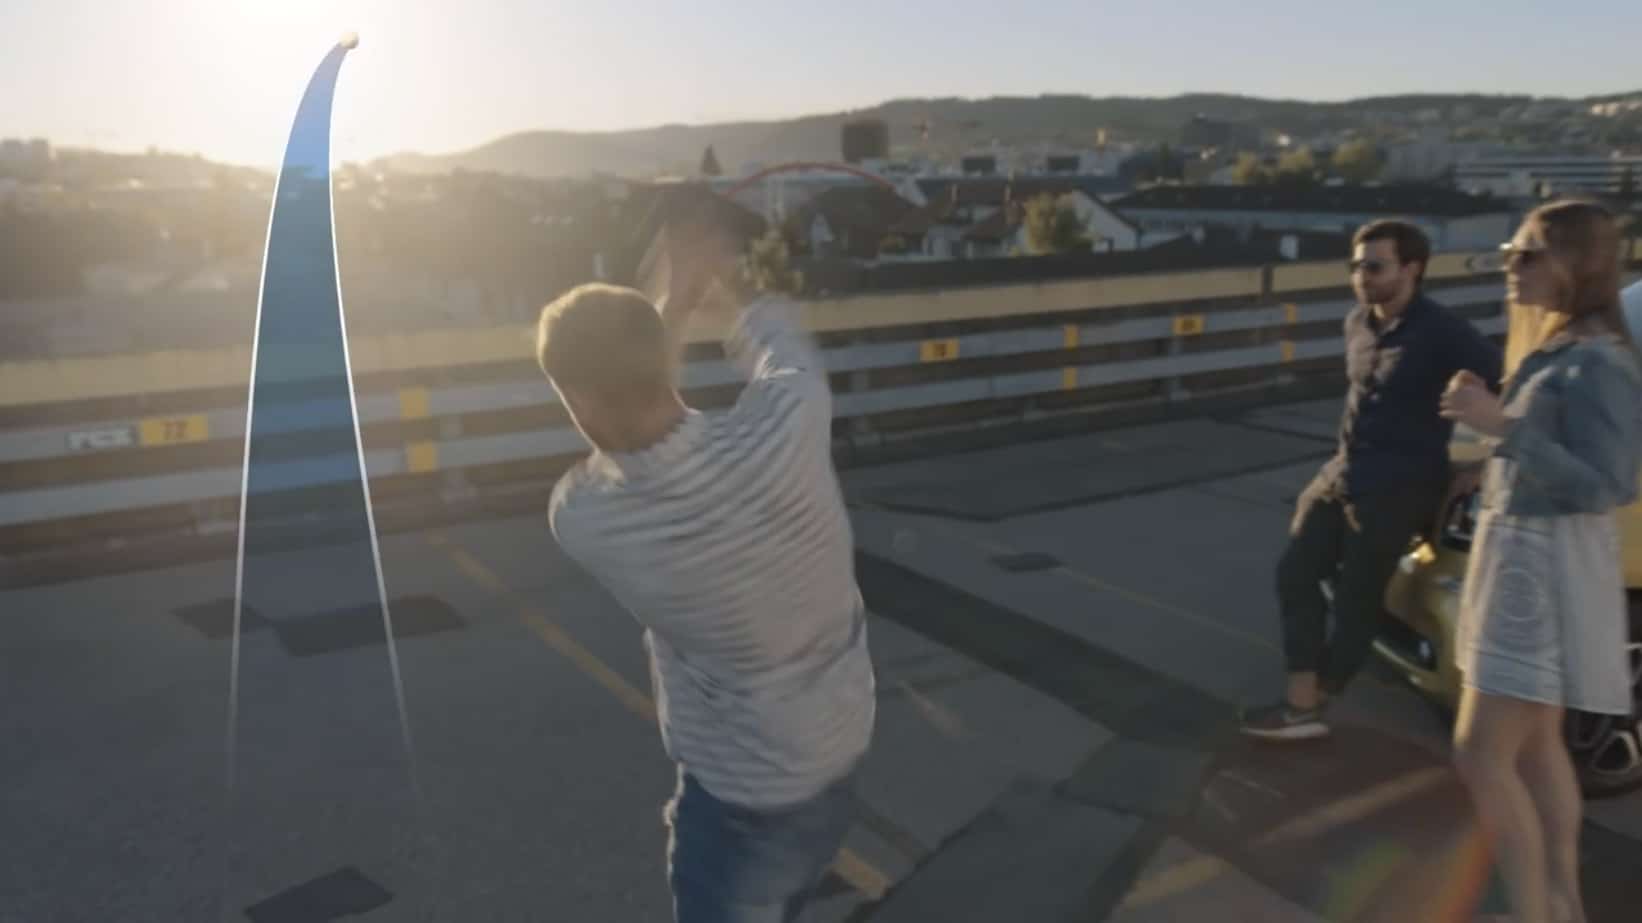 Play across your city: with smart urban golf